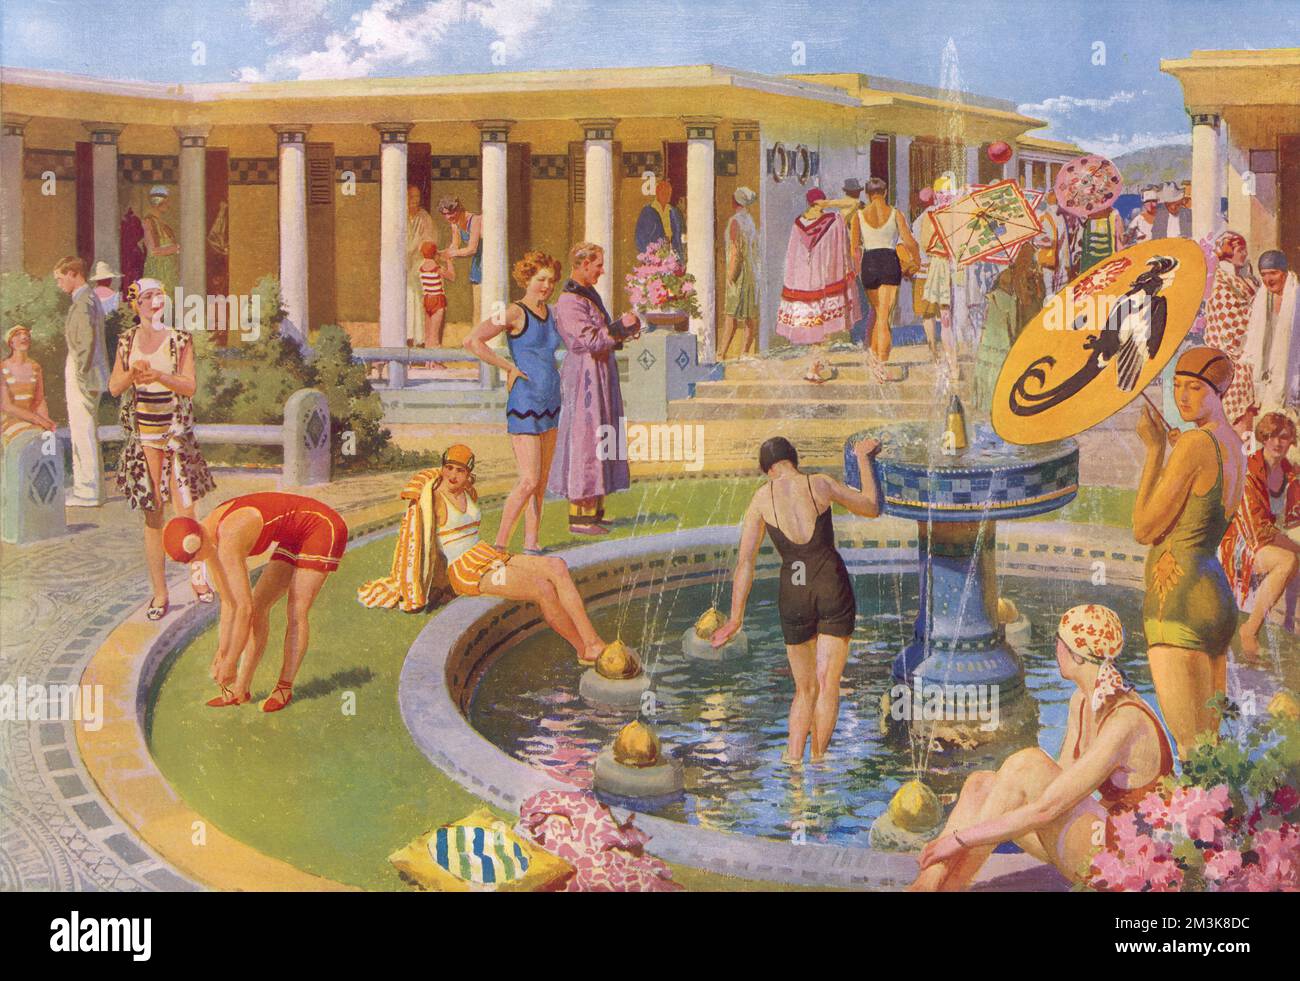 This image depicts the New Bath at Deauville in Normandy by F. Matania. The baths were based on the classic style of ancient Rome providing luxury to wealthy travellers.     Date: 14th July 1928 Stock Photo